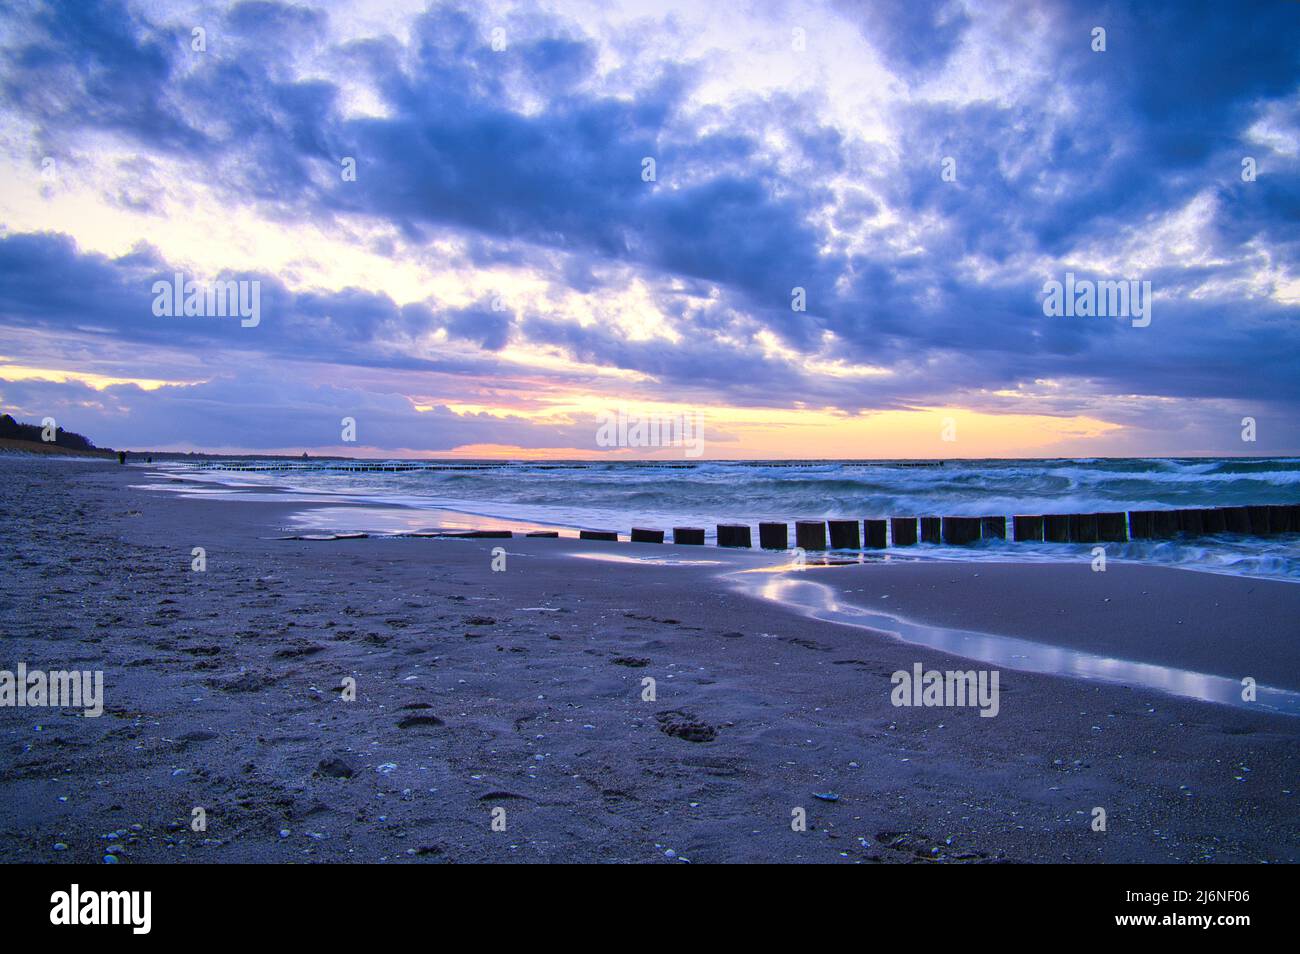 sunset on the beach of the Baltic Sea. Groynes reach into the sea. blue hour with clouds in the sky. Landscape photo in Zingst Stock Photo